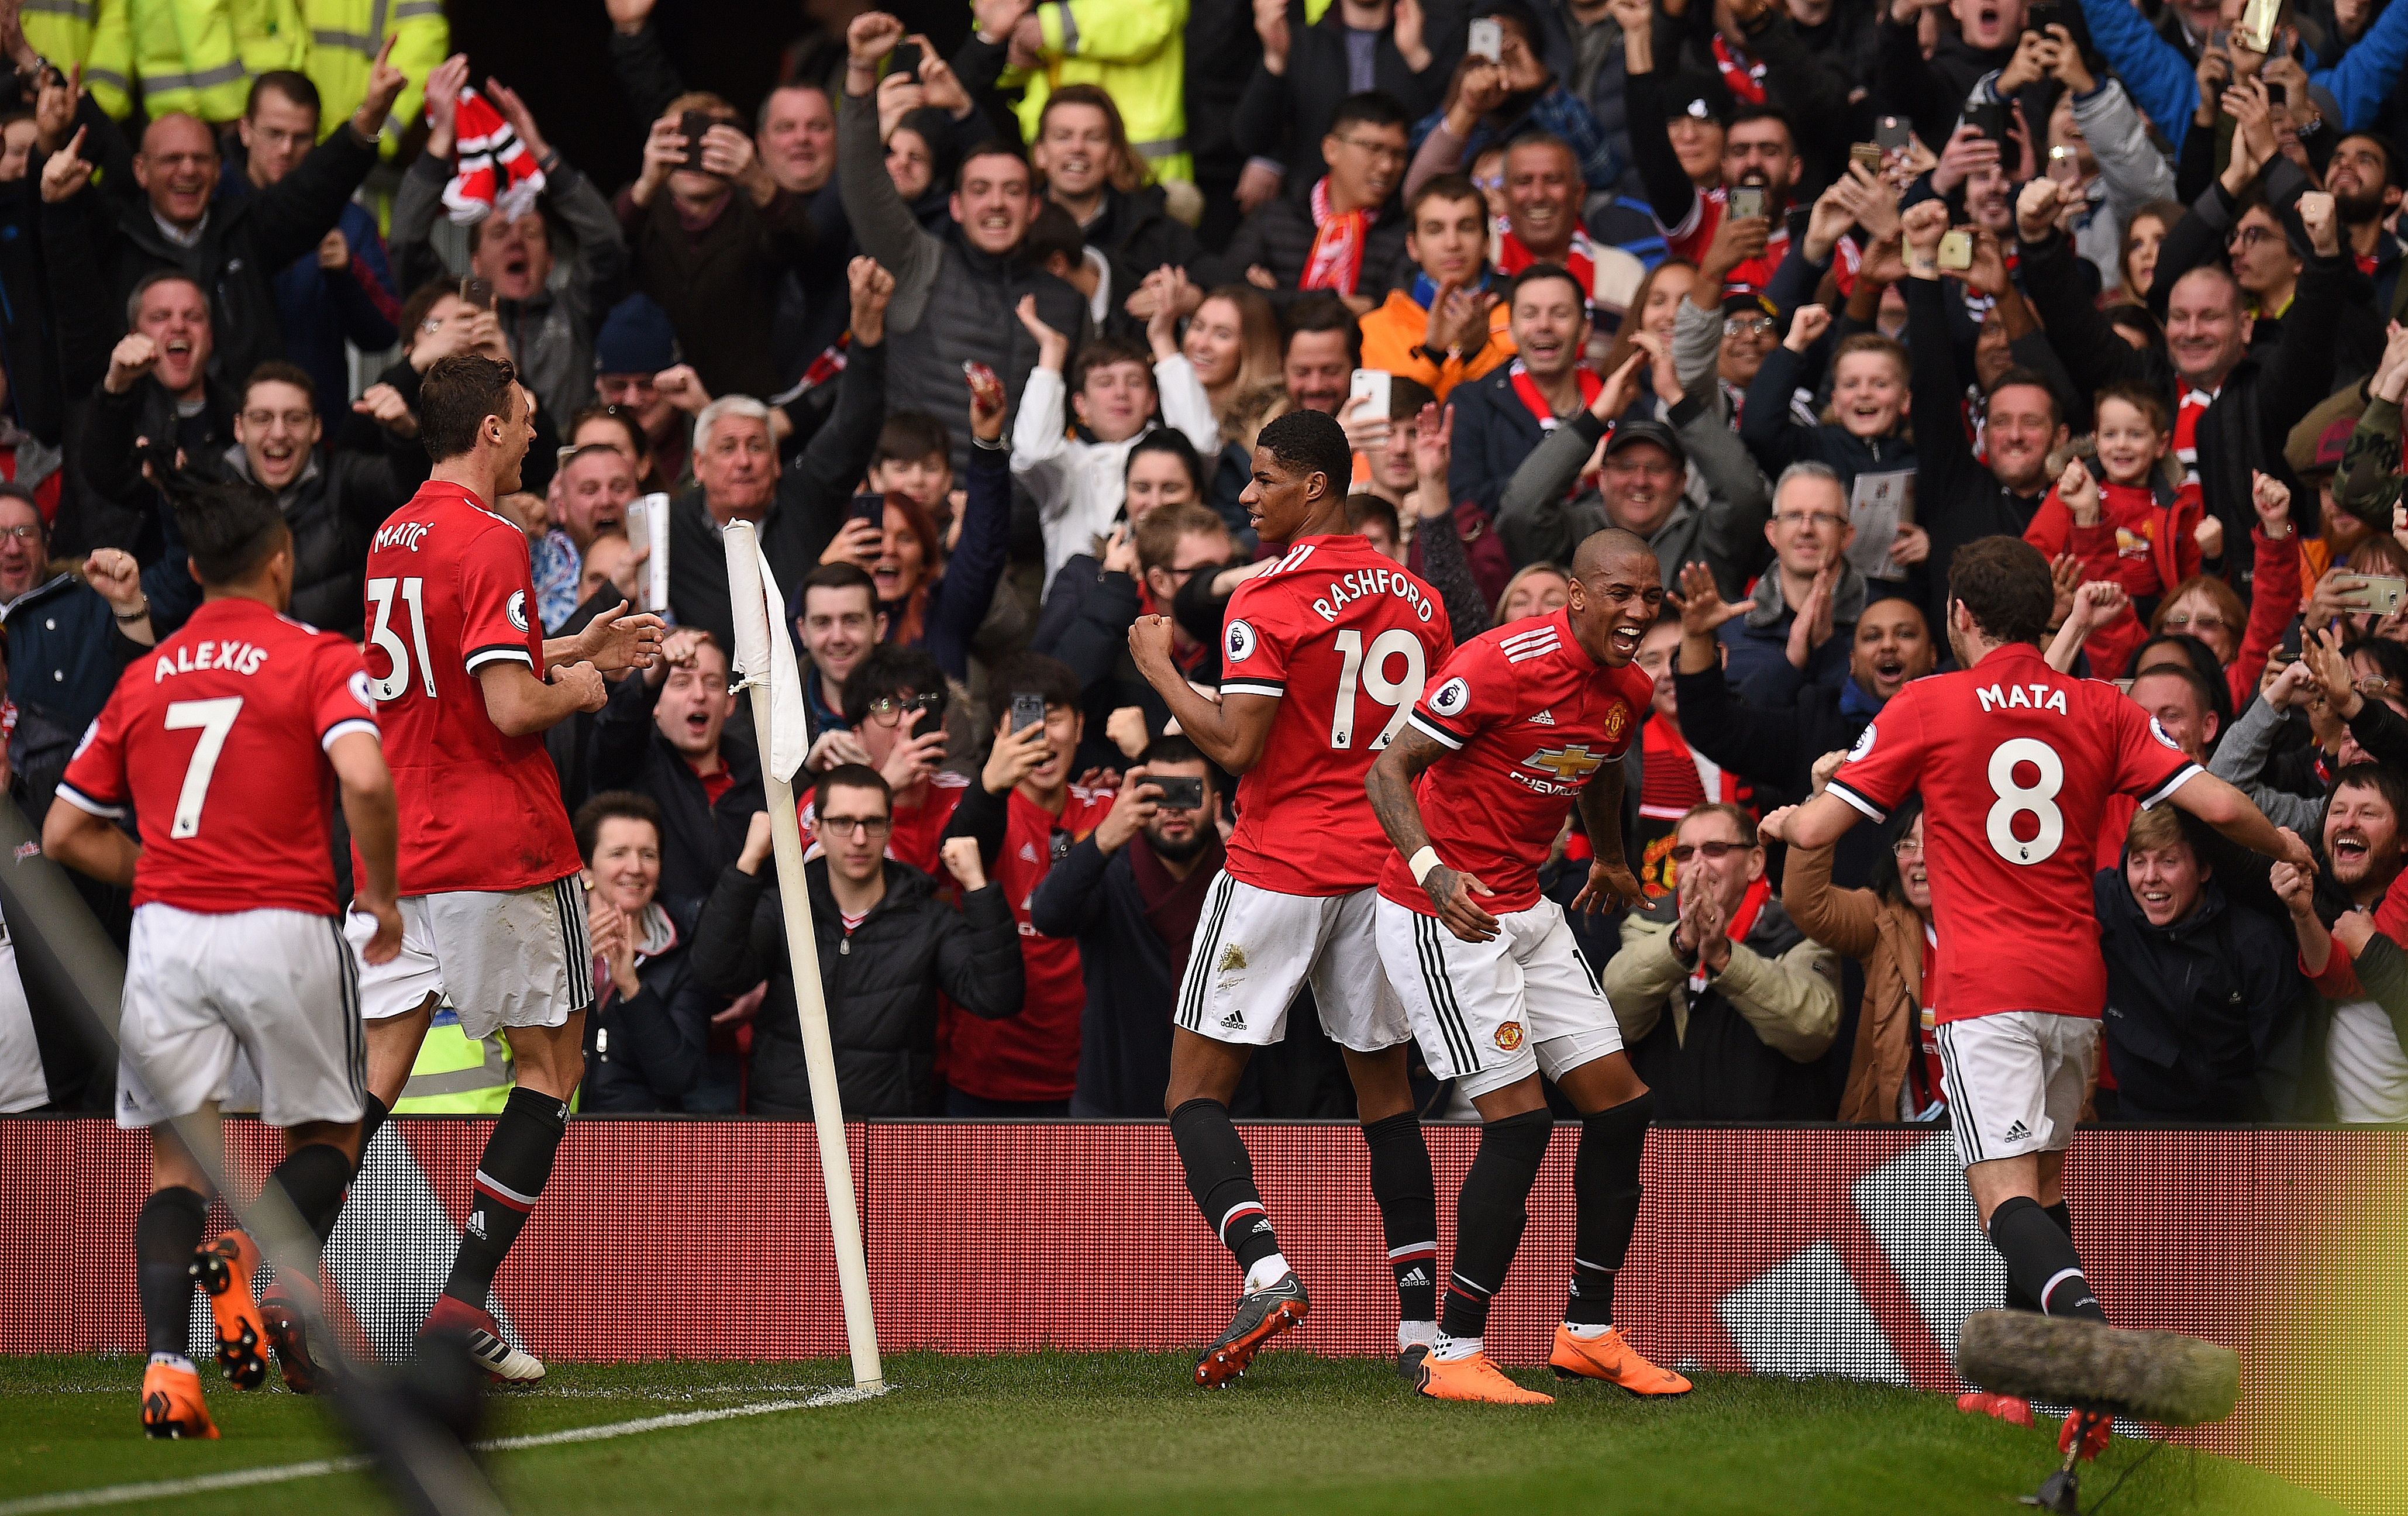 Manchester United players celebrate after Manchester United's English striker Marcus Rashford (C) scored their second goal during the English Premier League football match between Manchester United and Liverpool at Old Trafford in Manchester, north west England, on March 10, 2018. / AFP PHOTO / Oli SCARFF / RESTRICTED TO EDITORIAL USE. No use with unauthorized audio, video, data, fixture lists, club/league logos or 'live' services. Online in-match use limited to 75 images, no video emulation. No use in betting, games or single club/league/player publications.  /         (Photo credit should read OLI SCARFF/AFP/Getty Images)